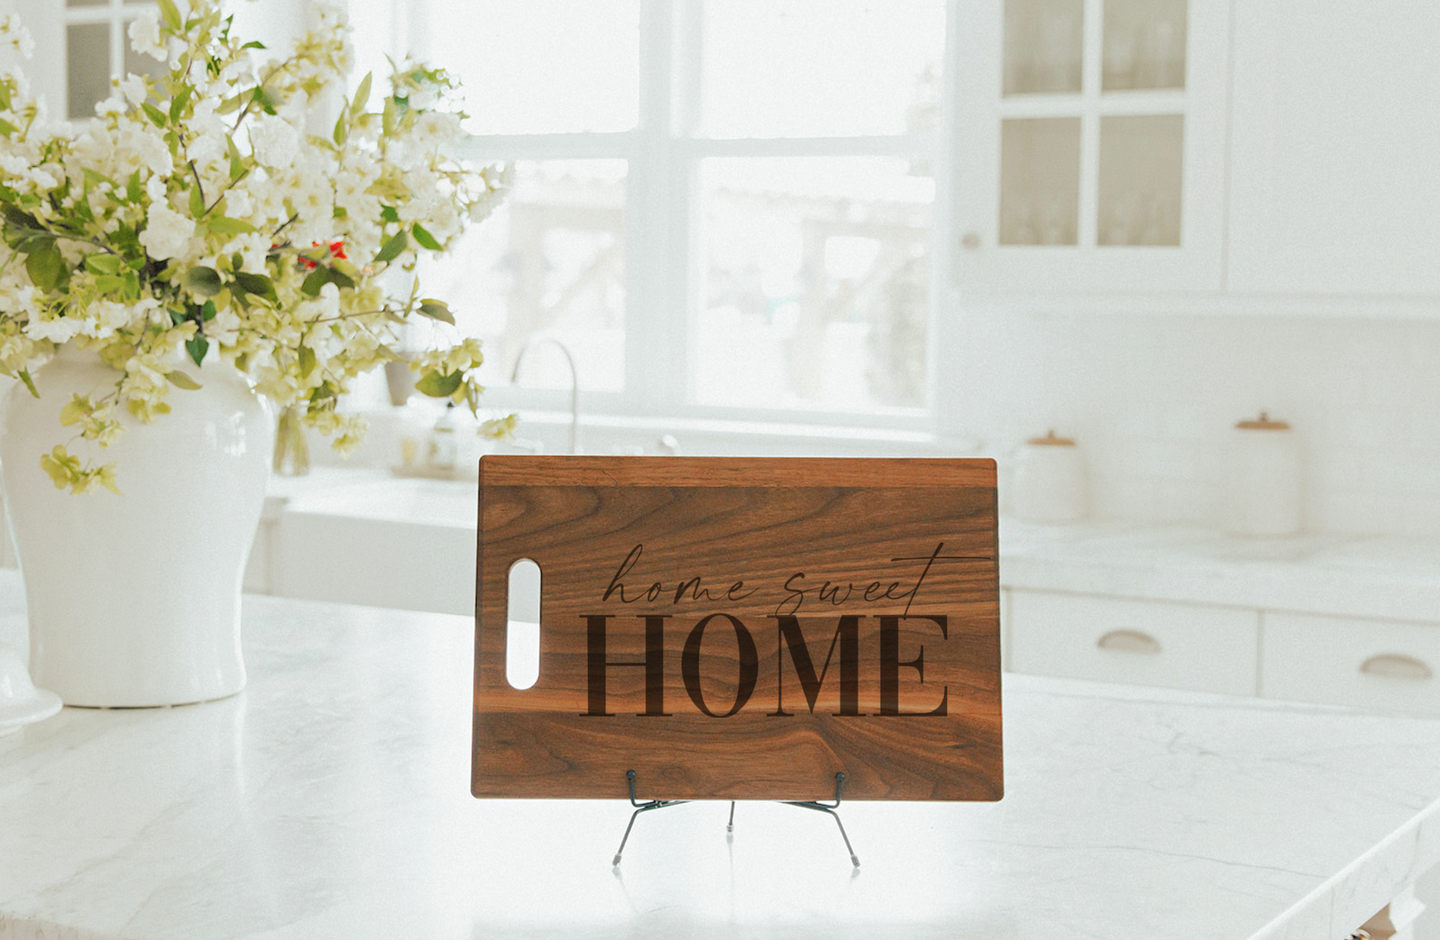 THNKS - Home Sweet Home Engraved Large Walnut Chopping Board with Cutout Handle